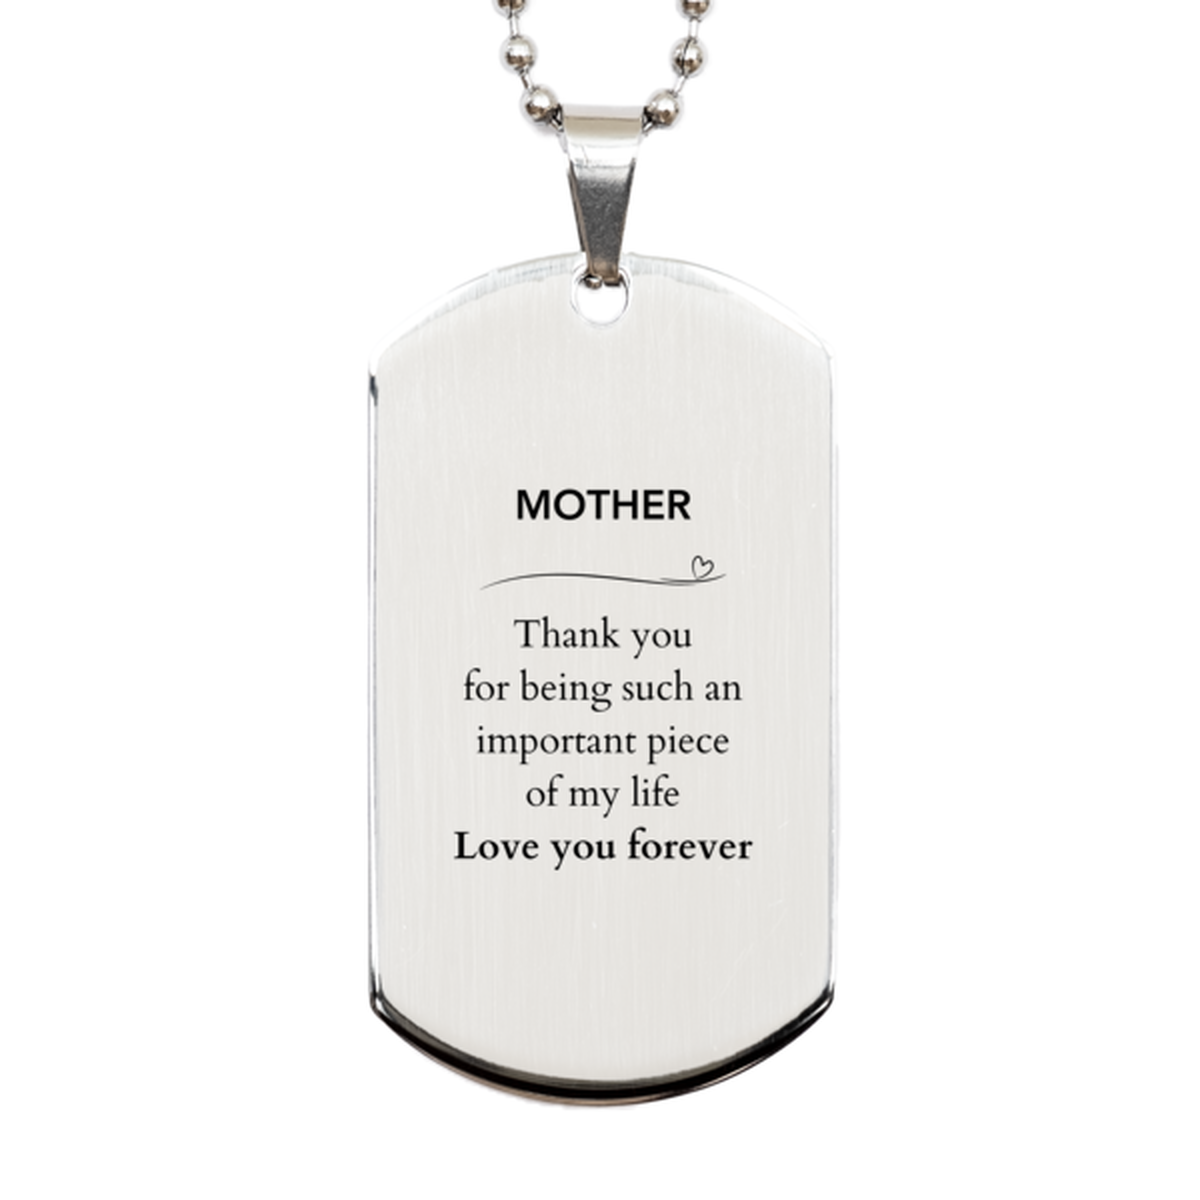 Appropriate Mother Silver Dog Tag Epic Birthday Gifts for Mother Thank you for being such an important piece of my life Mother Christmas Mothers Fathers Day